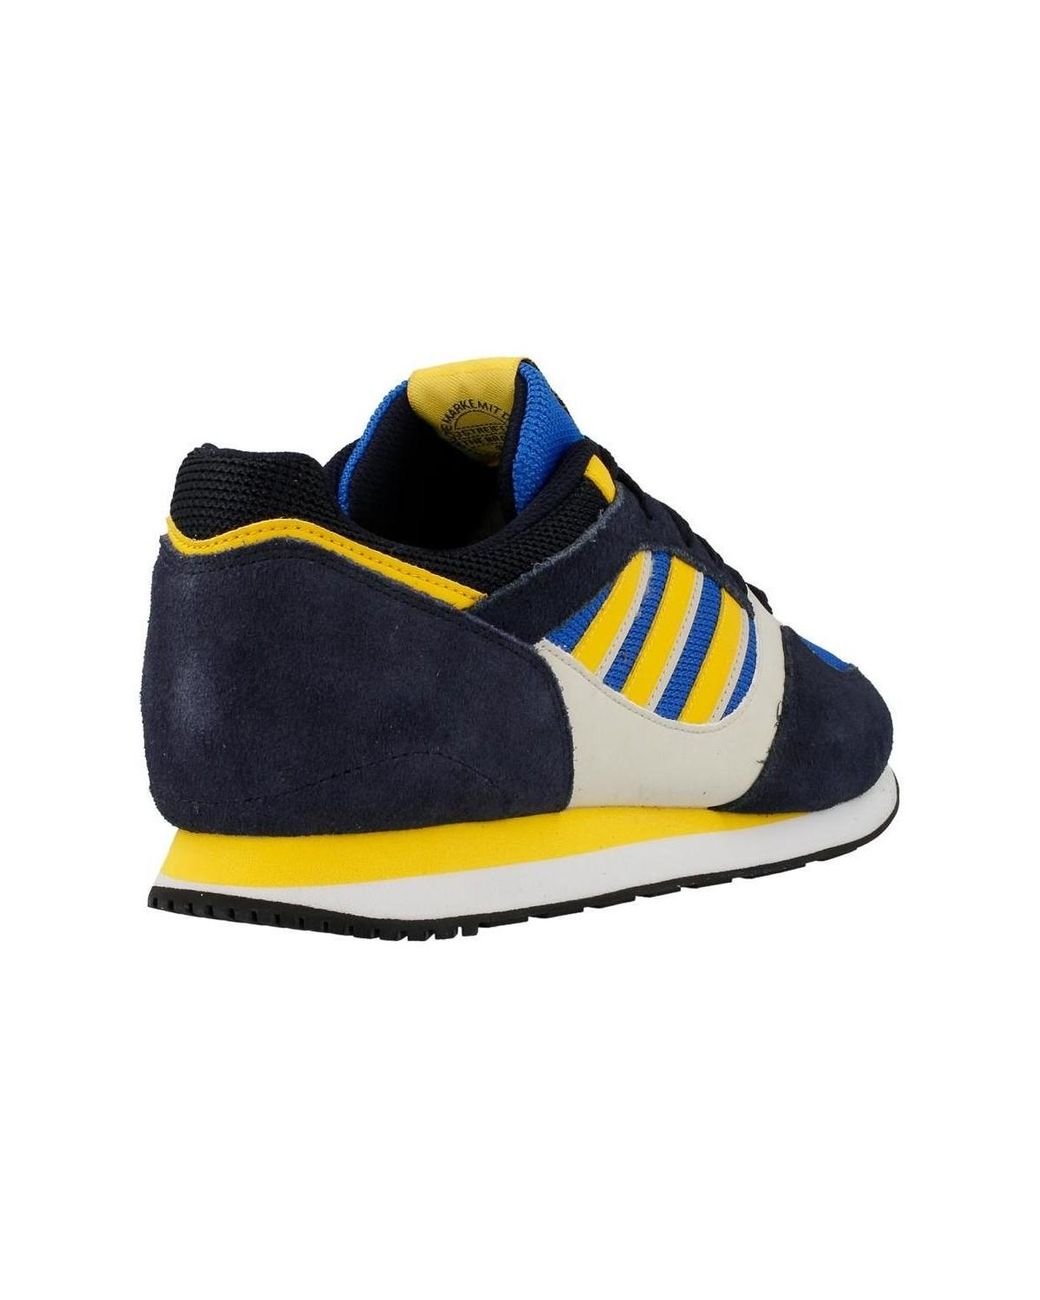 adidas zx 100 trainers